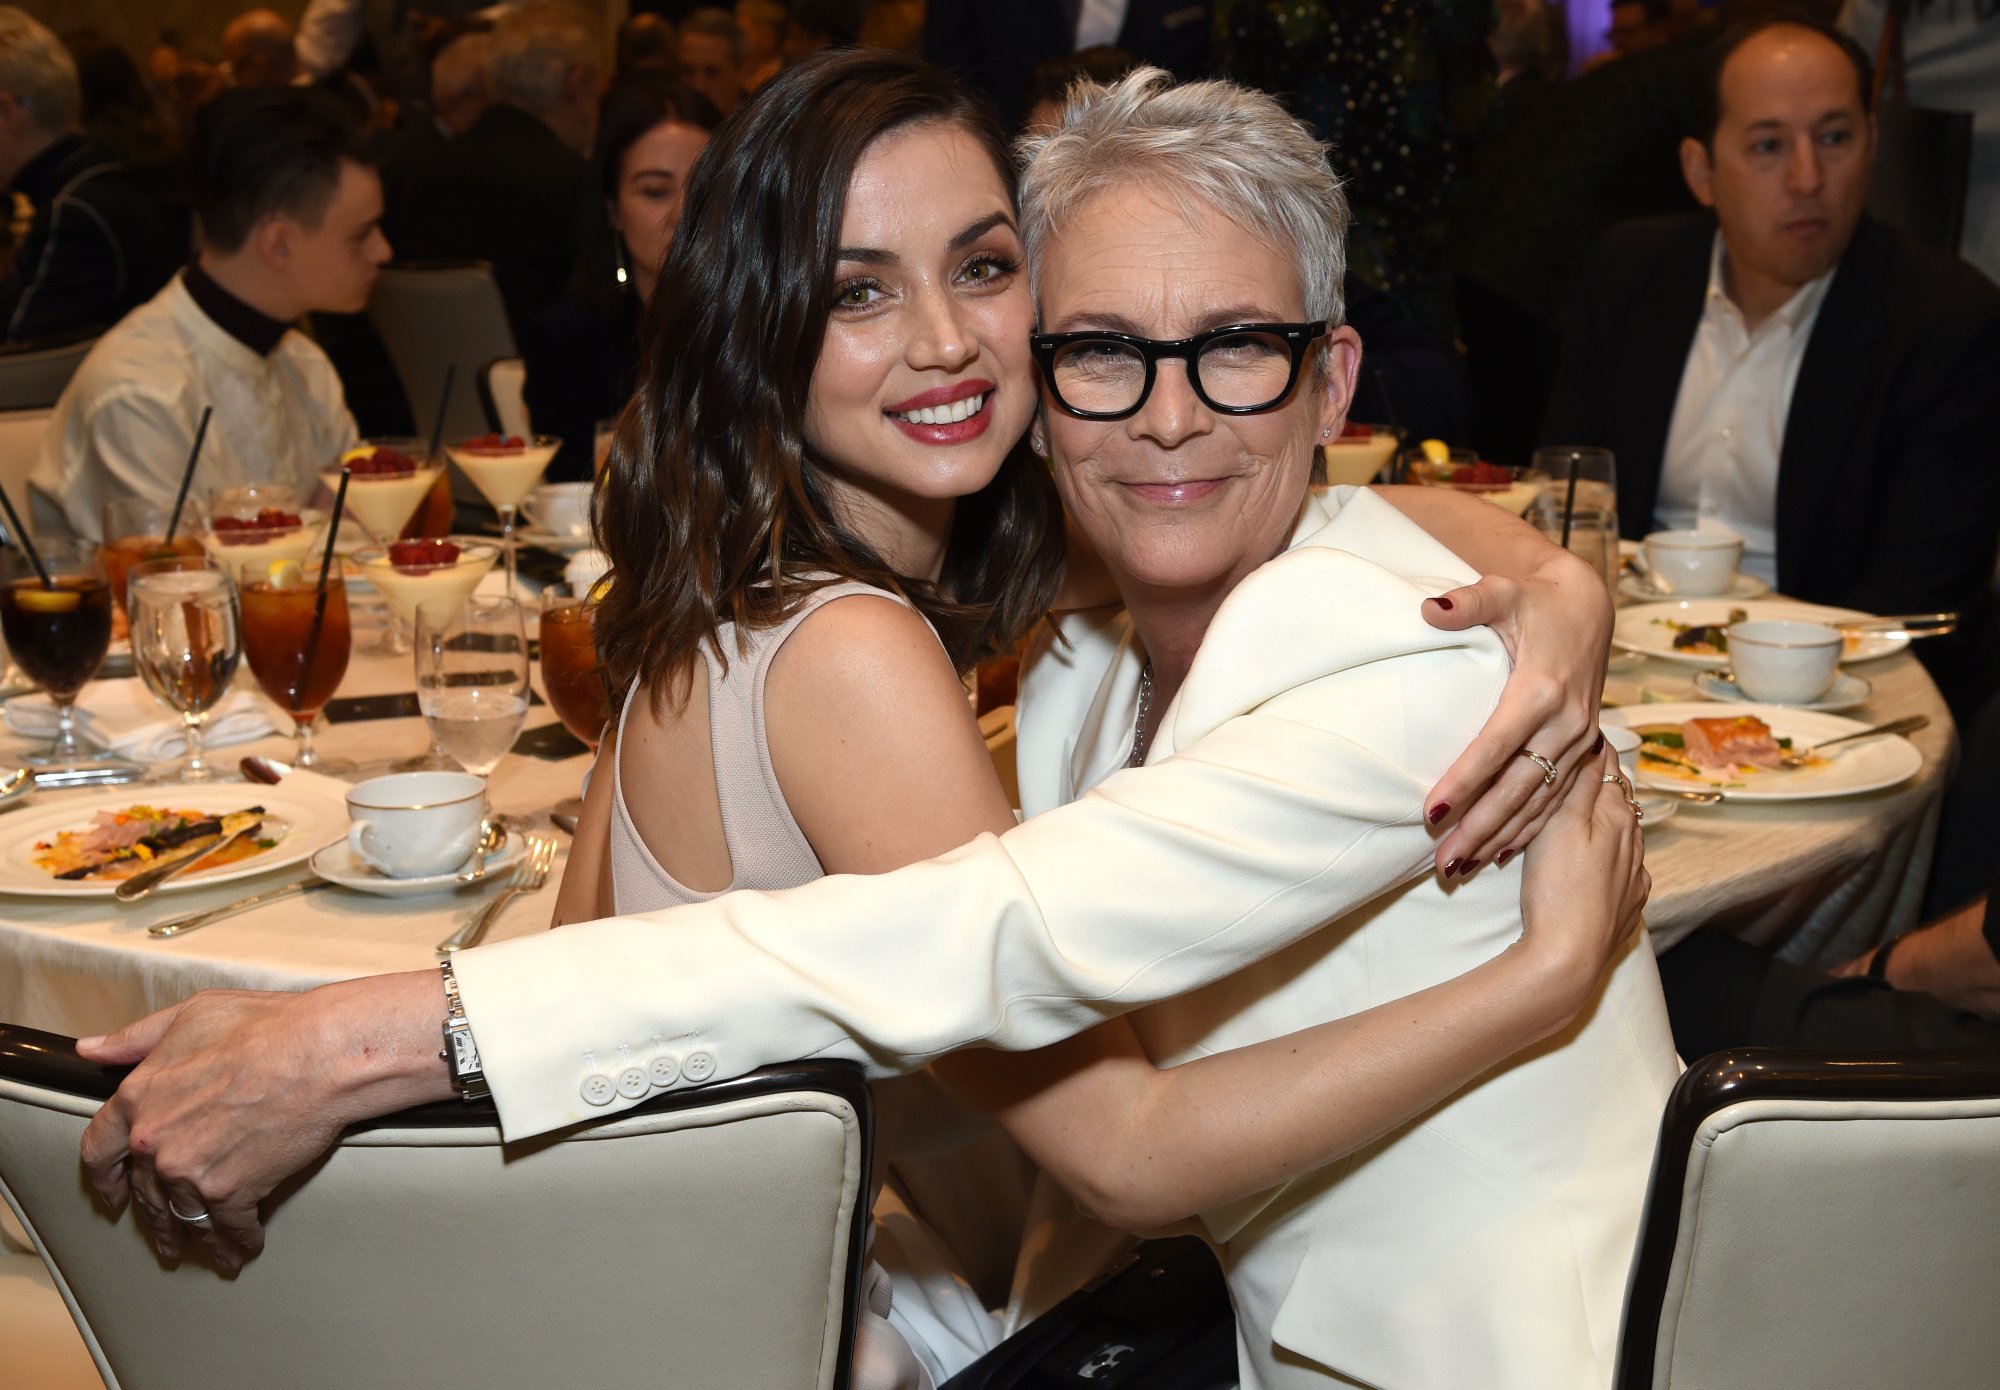 'Knives Out' actors Ana de Armas and Jamie Lee Curtis sitting next to each other at a table smiling, hugging each other.